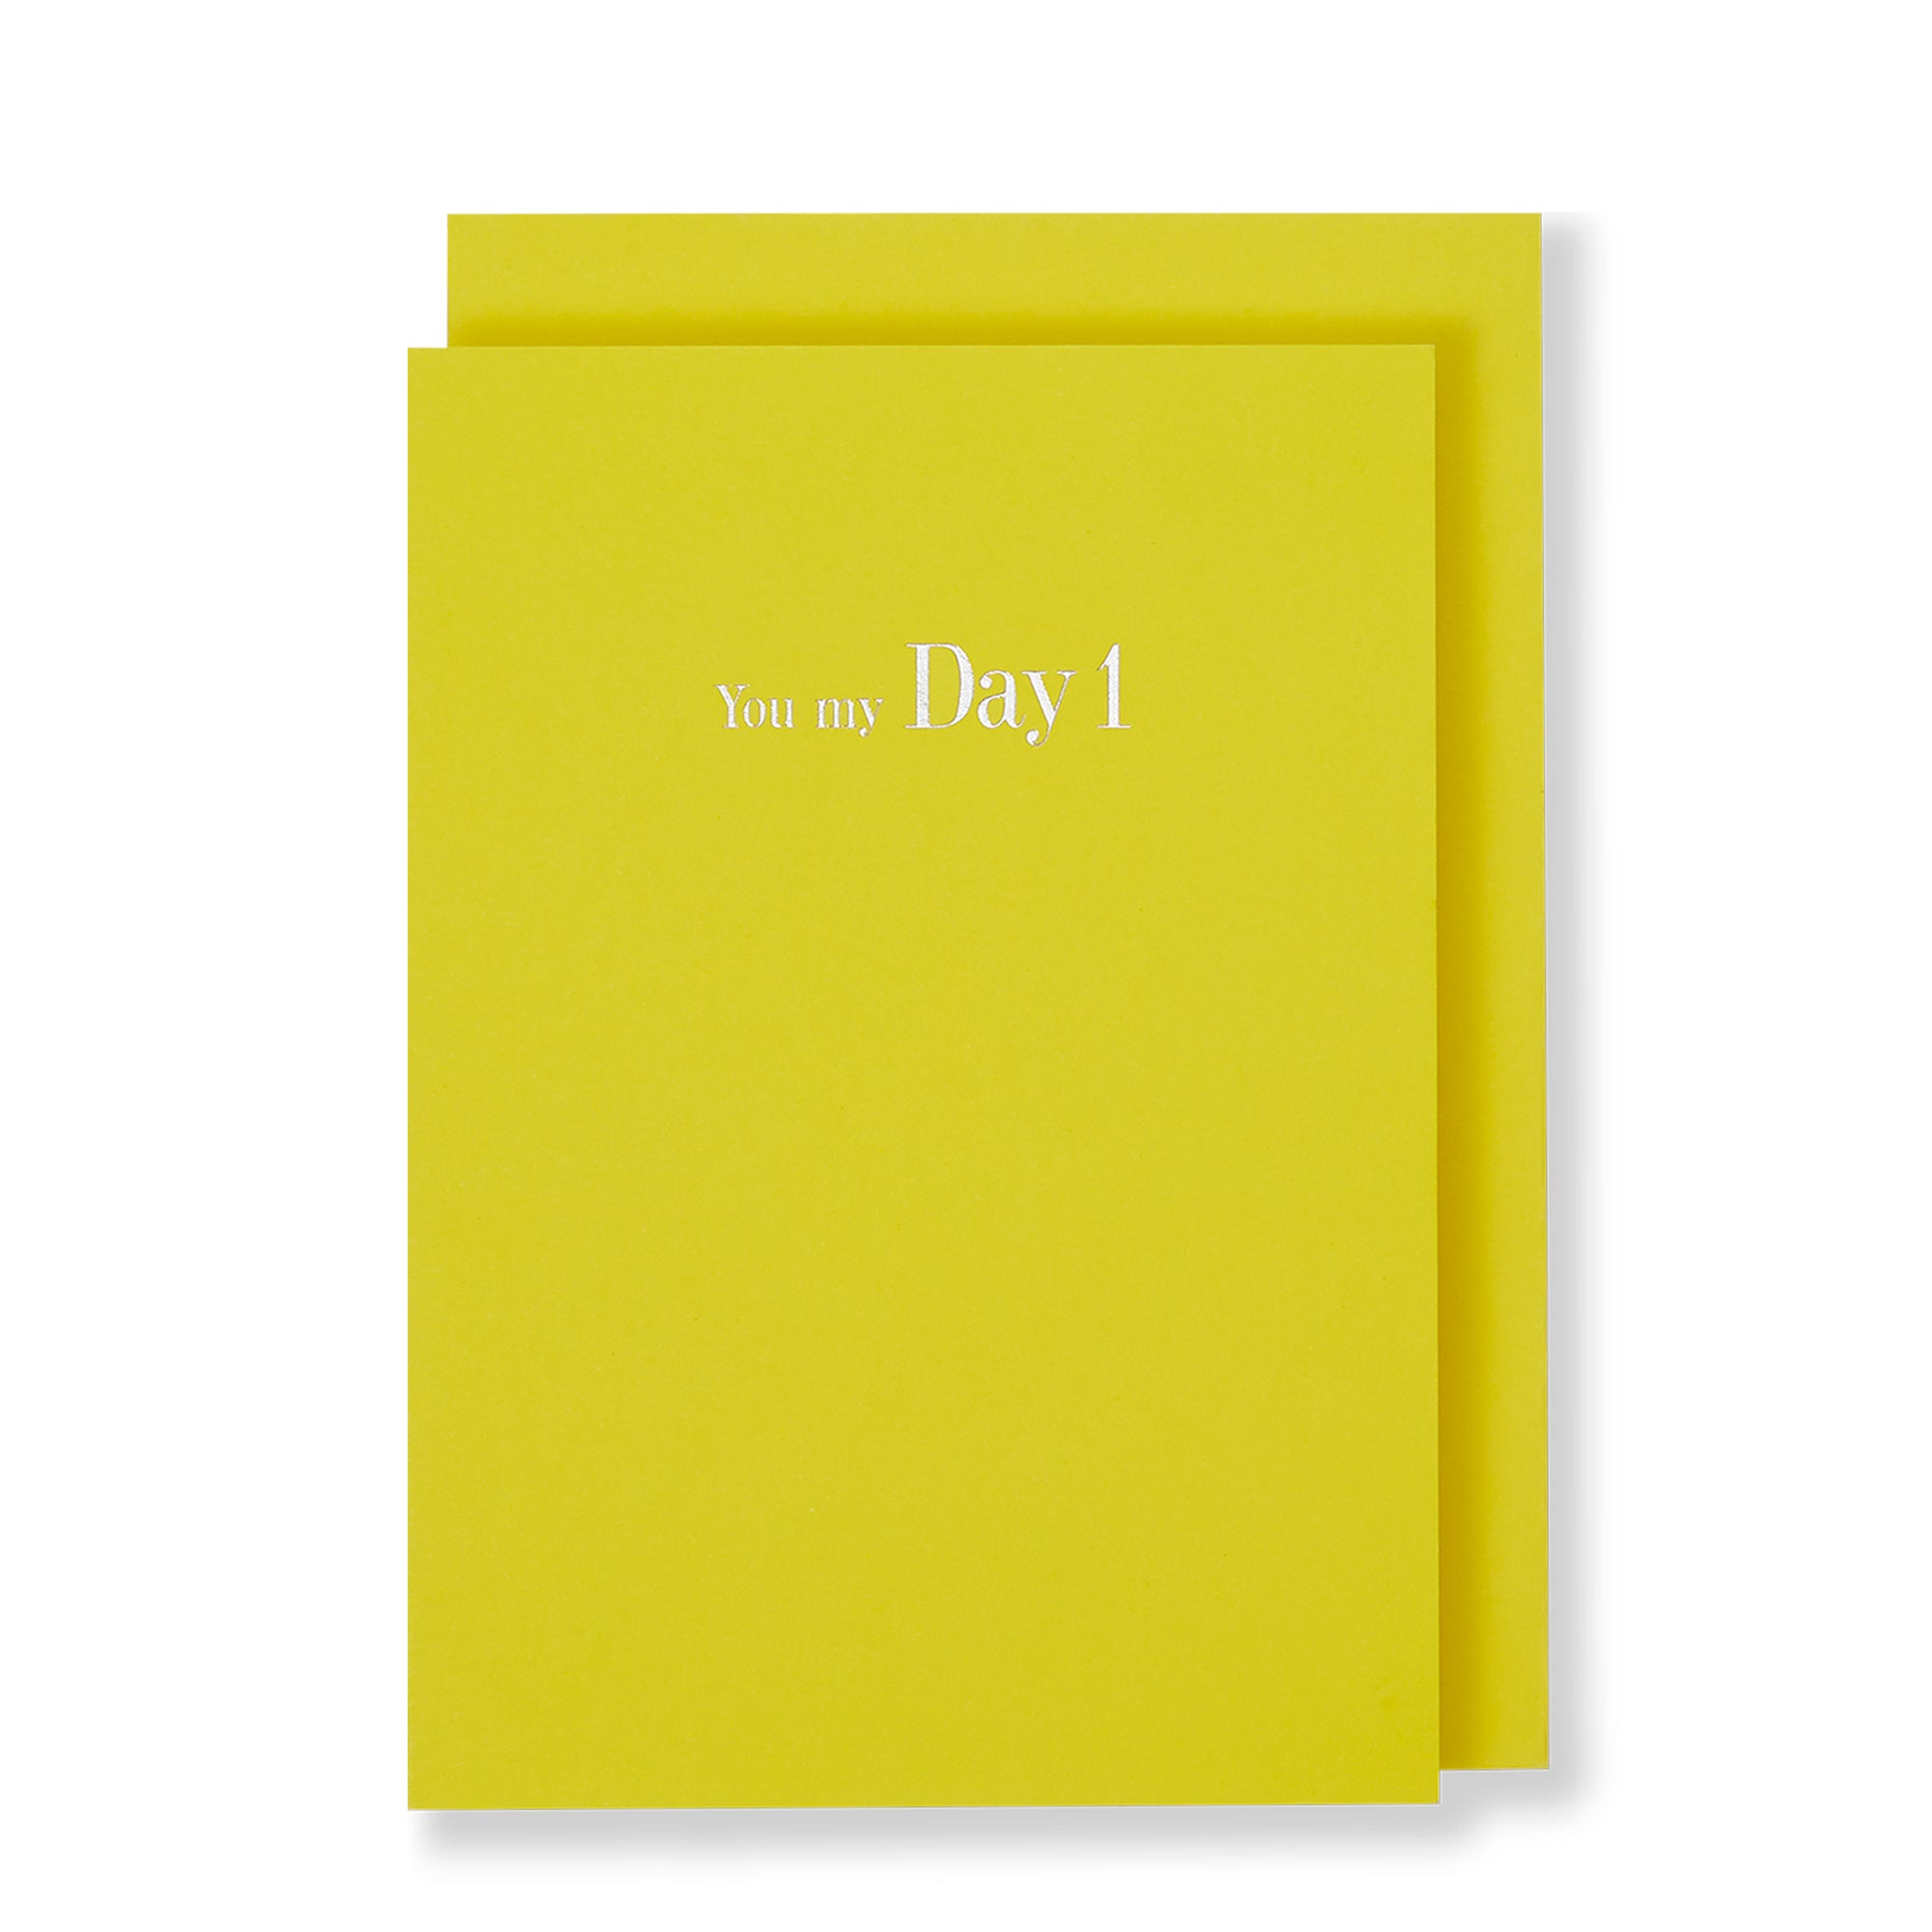 You My Day  Greeting Card in Yellow, Front